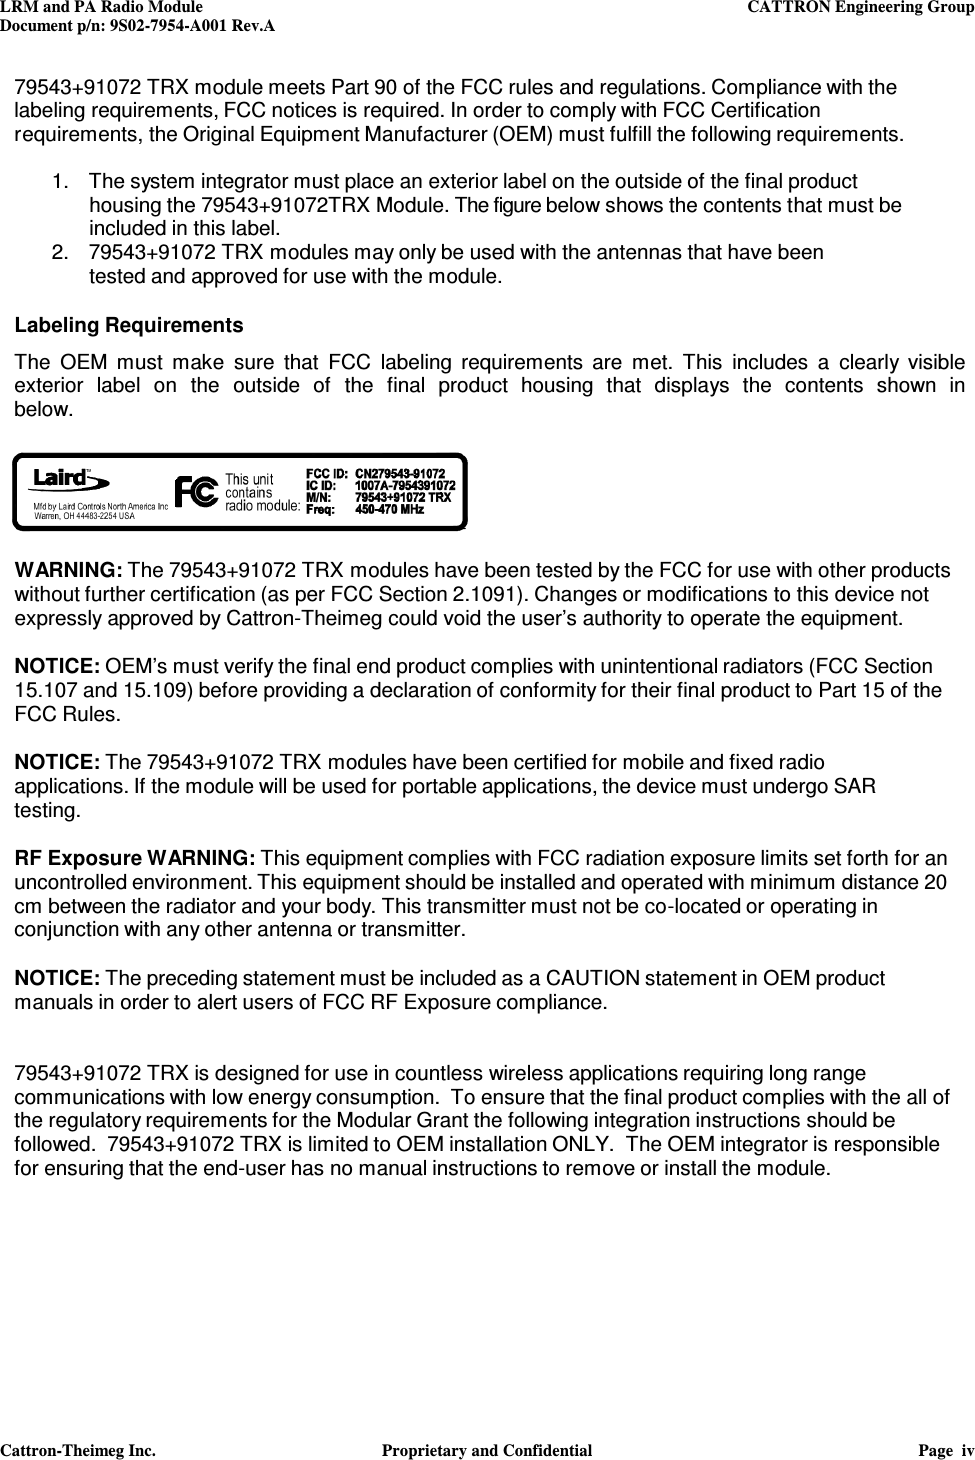 LRM and PA Radio Module    CATTRON Engineering Group Document p/n: 9S02-7954-A001 Rev.A   Cattron-Theimeg Inc.  Proprietary and Confidential  Page  iv  79543+91072 TRX module meets Part 90 of the FCC rules and regulations. Compliance with the labeling requirements, FCC notices is required. In order to comply with FCC Certification requirements, the Original Equipment Manufacturer (OEM) must fulfill the following requirements.  1.   The system integrator must place an exterior label on the outside of the final product housing the 79543+91072TRX Module. The figure below shows the contents that must be included in this label. 2.   79543+91072 TRX modules may only be used with the antennas that have been tested and approved for use with the module.   Labeling Requirements  The  OEM  must  make  sure  that  FCC  labeling  requirements  are  met.  This  includes  a  clearly  visible exterior  label  on  the  outside  of  the  final  product  housing  that  displays  the  contents  shown  in below.     WARNING: The 79543+91072 TRX modules have been tested by the FCC for use with other products without further certification (as per FCC Section 2.1091). Changes or modifications to this device not expressly approved by Cattron-Theimeg could void the user’s authority to operate the equipment.  NOTICE: OEM’s must verify the final end product complies with unintentional radiators (FCC Section 15.107 and 15.109) before providing a declaration of conformity for their final product to Part 15 of the FCC Rules.  NOTICE: The 79543+91072 TRX modules have been certified for mobile and fixed radio applications. If the module will be used for portable applications, the device must undergo SAR testing.  RF Exposure WARNING: This equipment complies with FCC radiation exposure limits set forth for an uncontrolled environment. This equipment should be installed and operated with minimum distance 20 cm between the radiator and your body. This transmitter must not be co-located or operating in conjunction with any other antenna or transmitter.  NOTICE: The preceding statement must be included as a CAUTION statement in OEM product manuals in order to alert users of FCC RF Exposure compliance.   79543+91072 TRX is designed for use in countless wireless applications requiring long range communications with low energy consumption.  To ensure that the final product complies with the all of the regulatory requirements for the Modular Grant the following integration instructions should be followed.  79543+91072 TRX is limited to OEM installation ONLY.  The OEM integrator is responsible for ensuring that the end-user has no manual instructions to remove or install the module.       